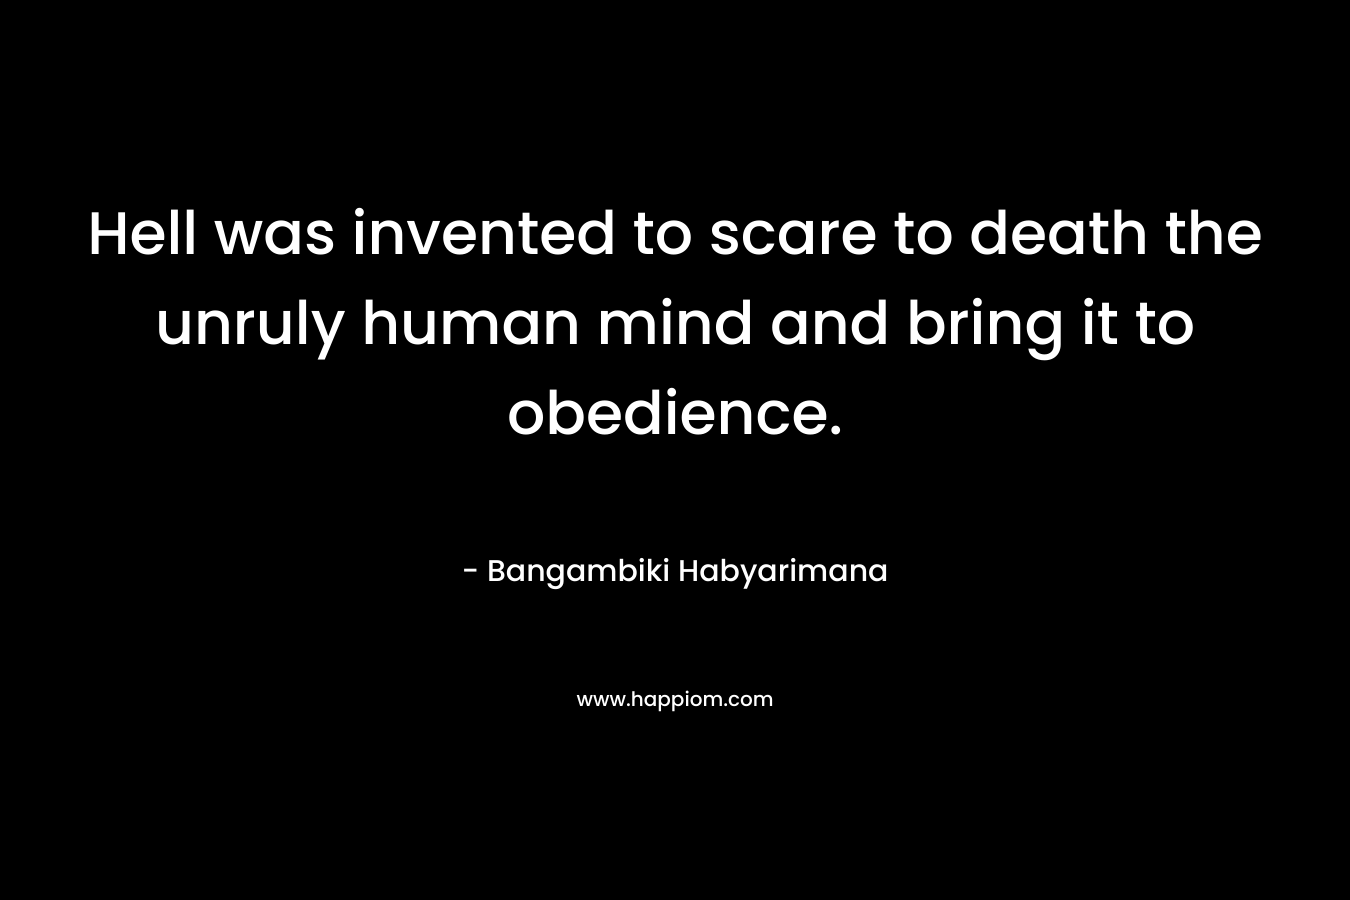 Hell was invented to scare to death the unruly human mind and bring it to obedience. – Bangambiki Habyarimana